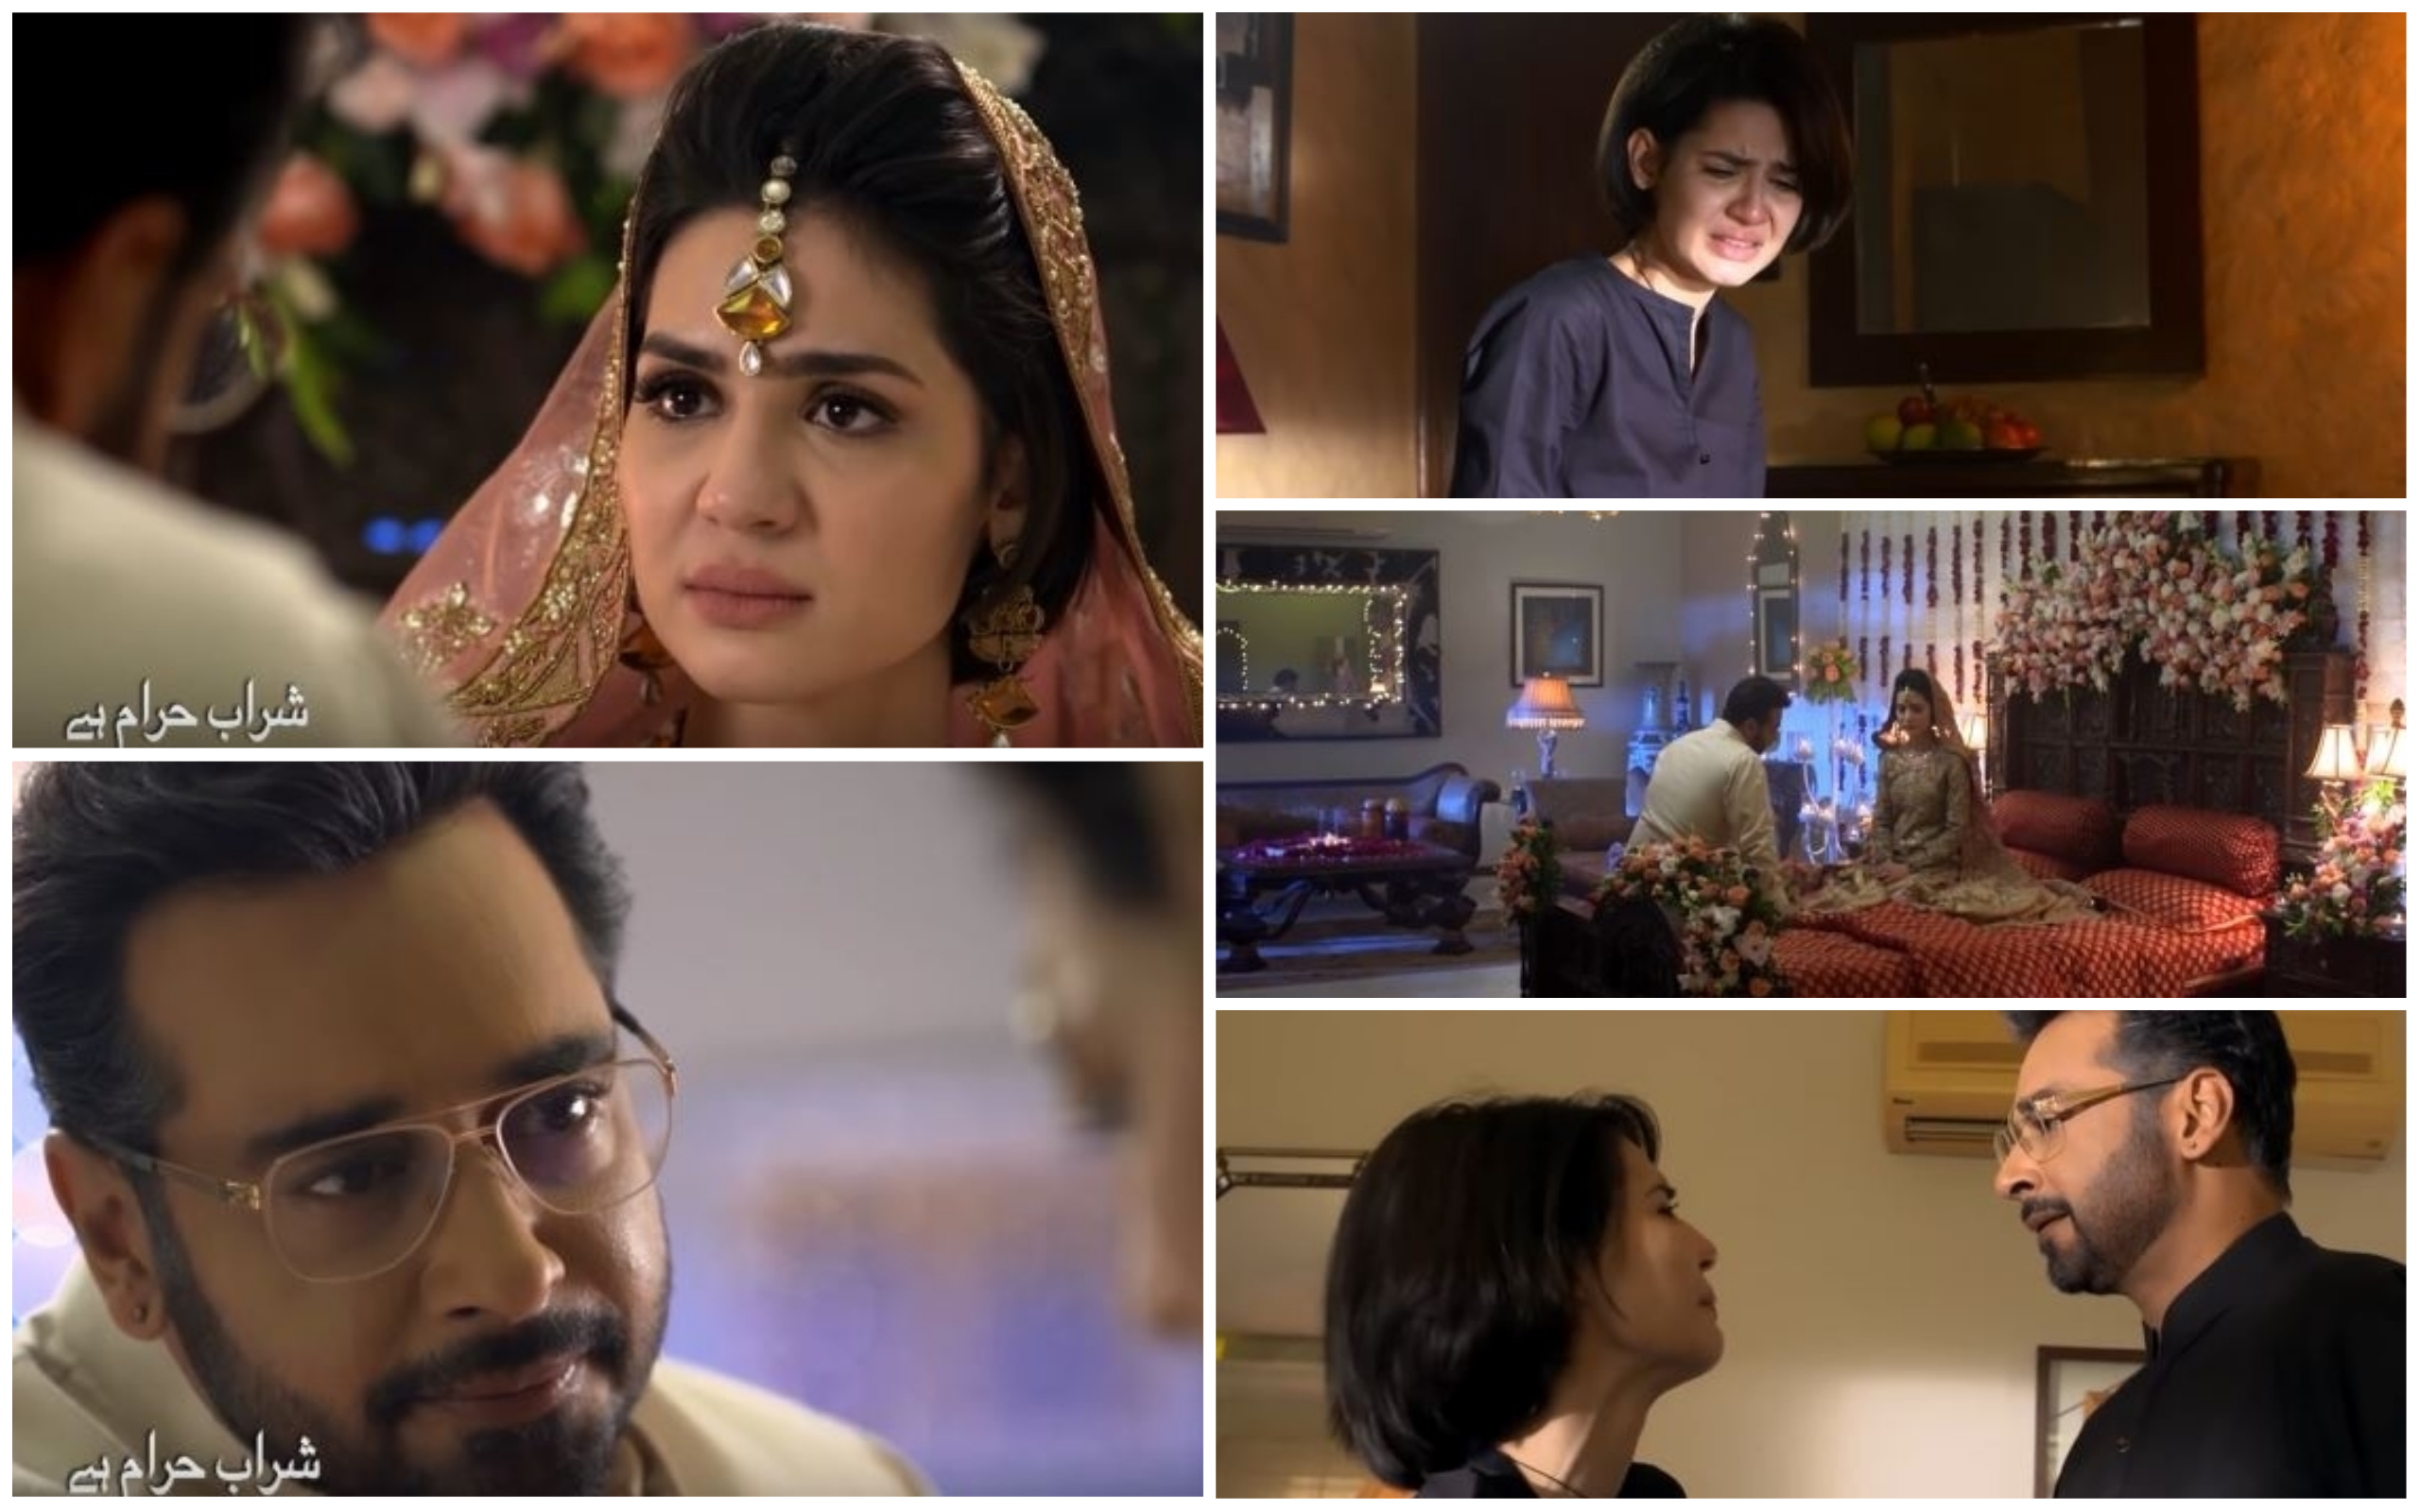 Muqaddar Episode 8 Story Review - Strong Performances